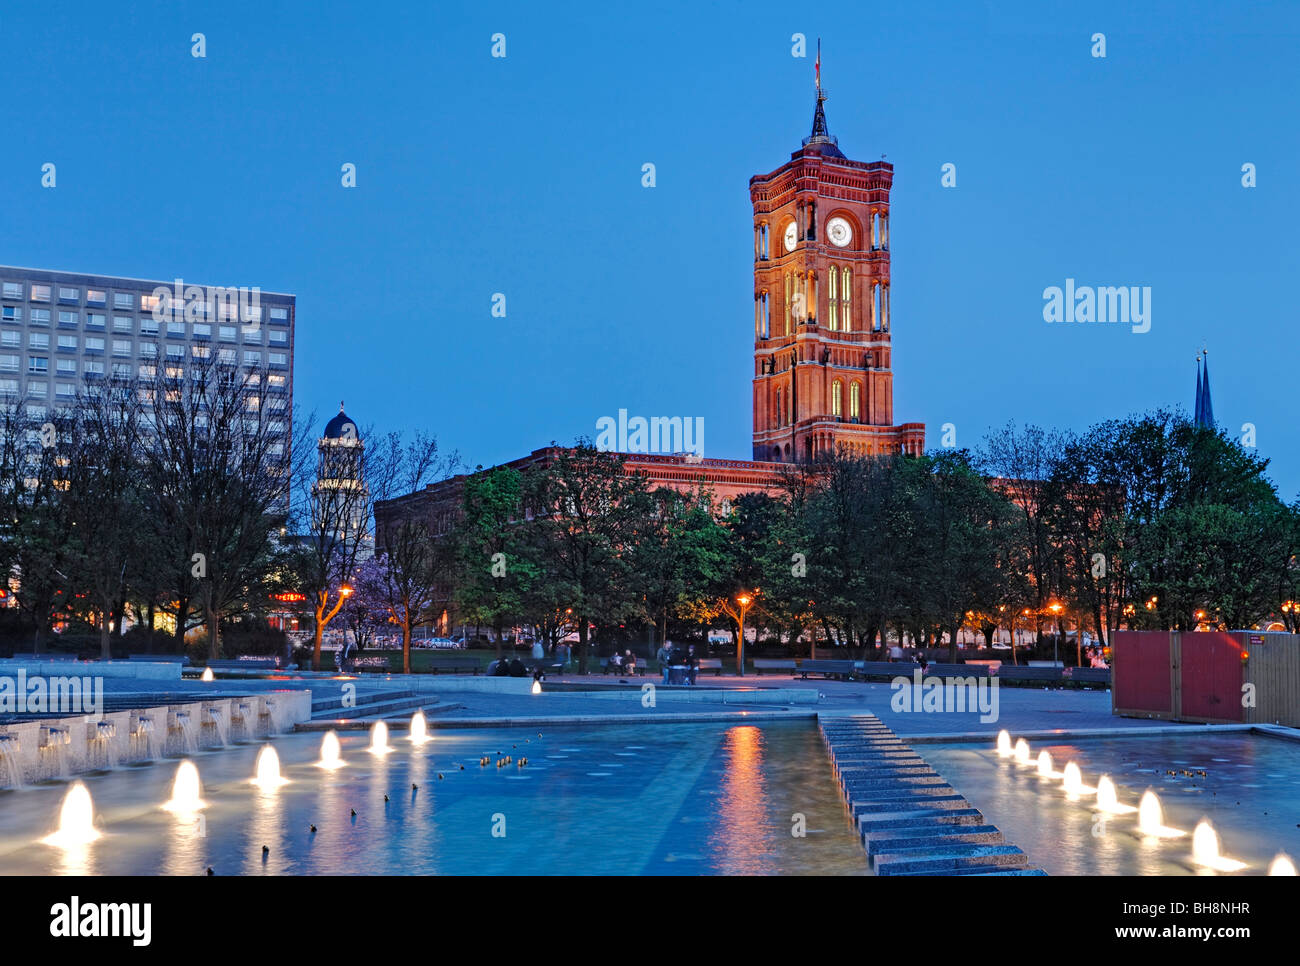 Rotes Rathaus, Red Town Hall on Alexanderplatz Square, Berlin, Germany, Europe Stock Photo